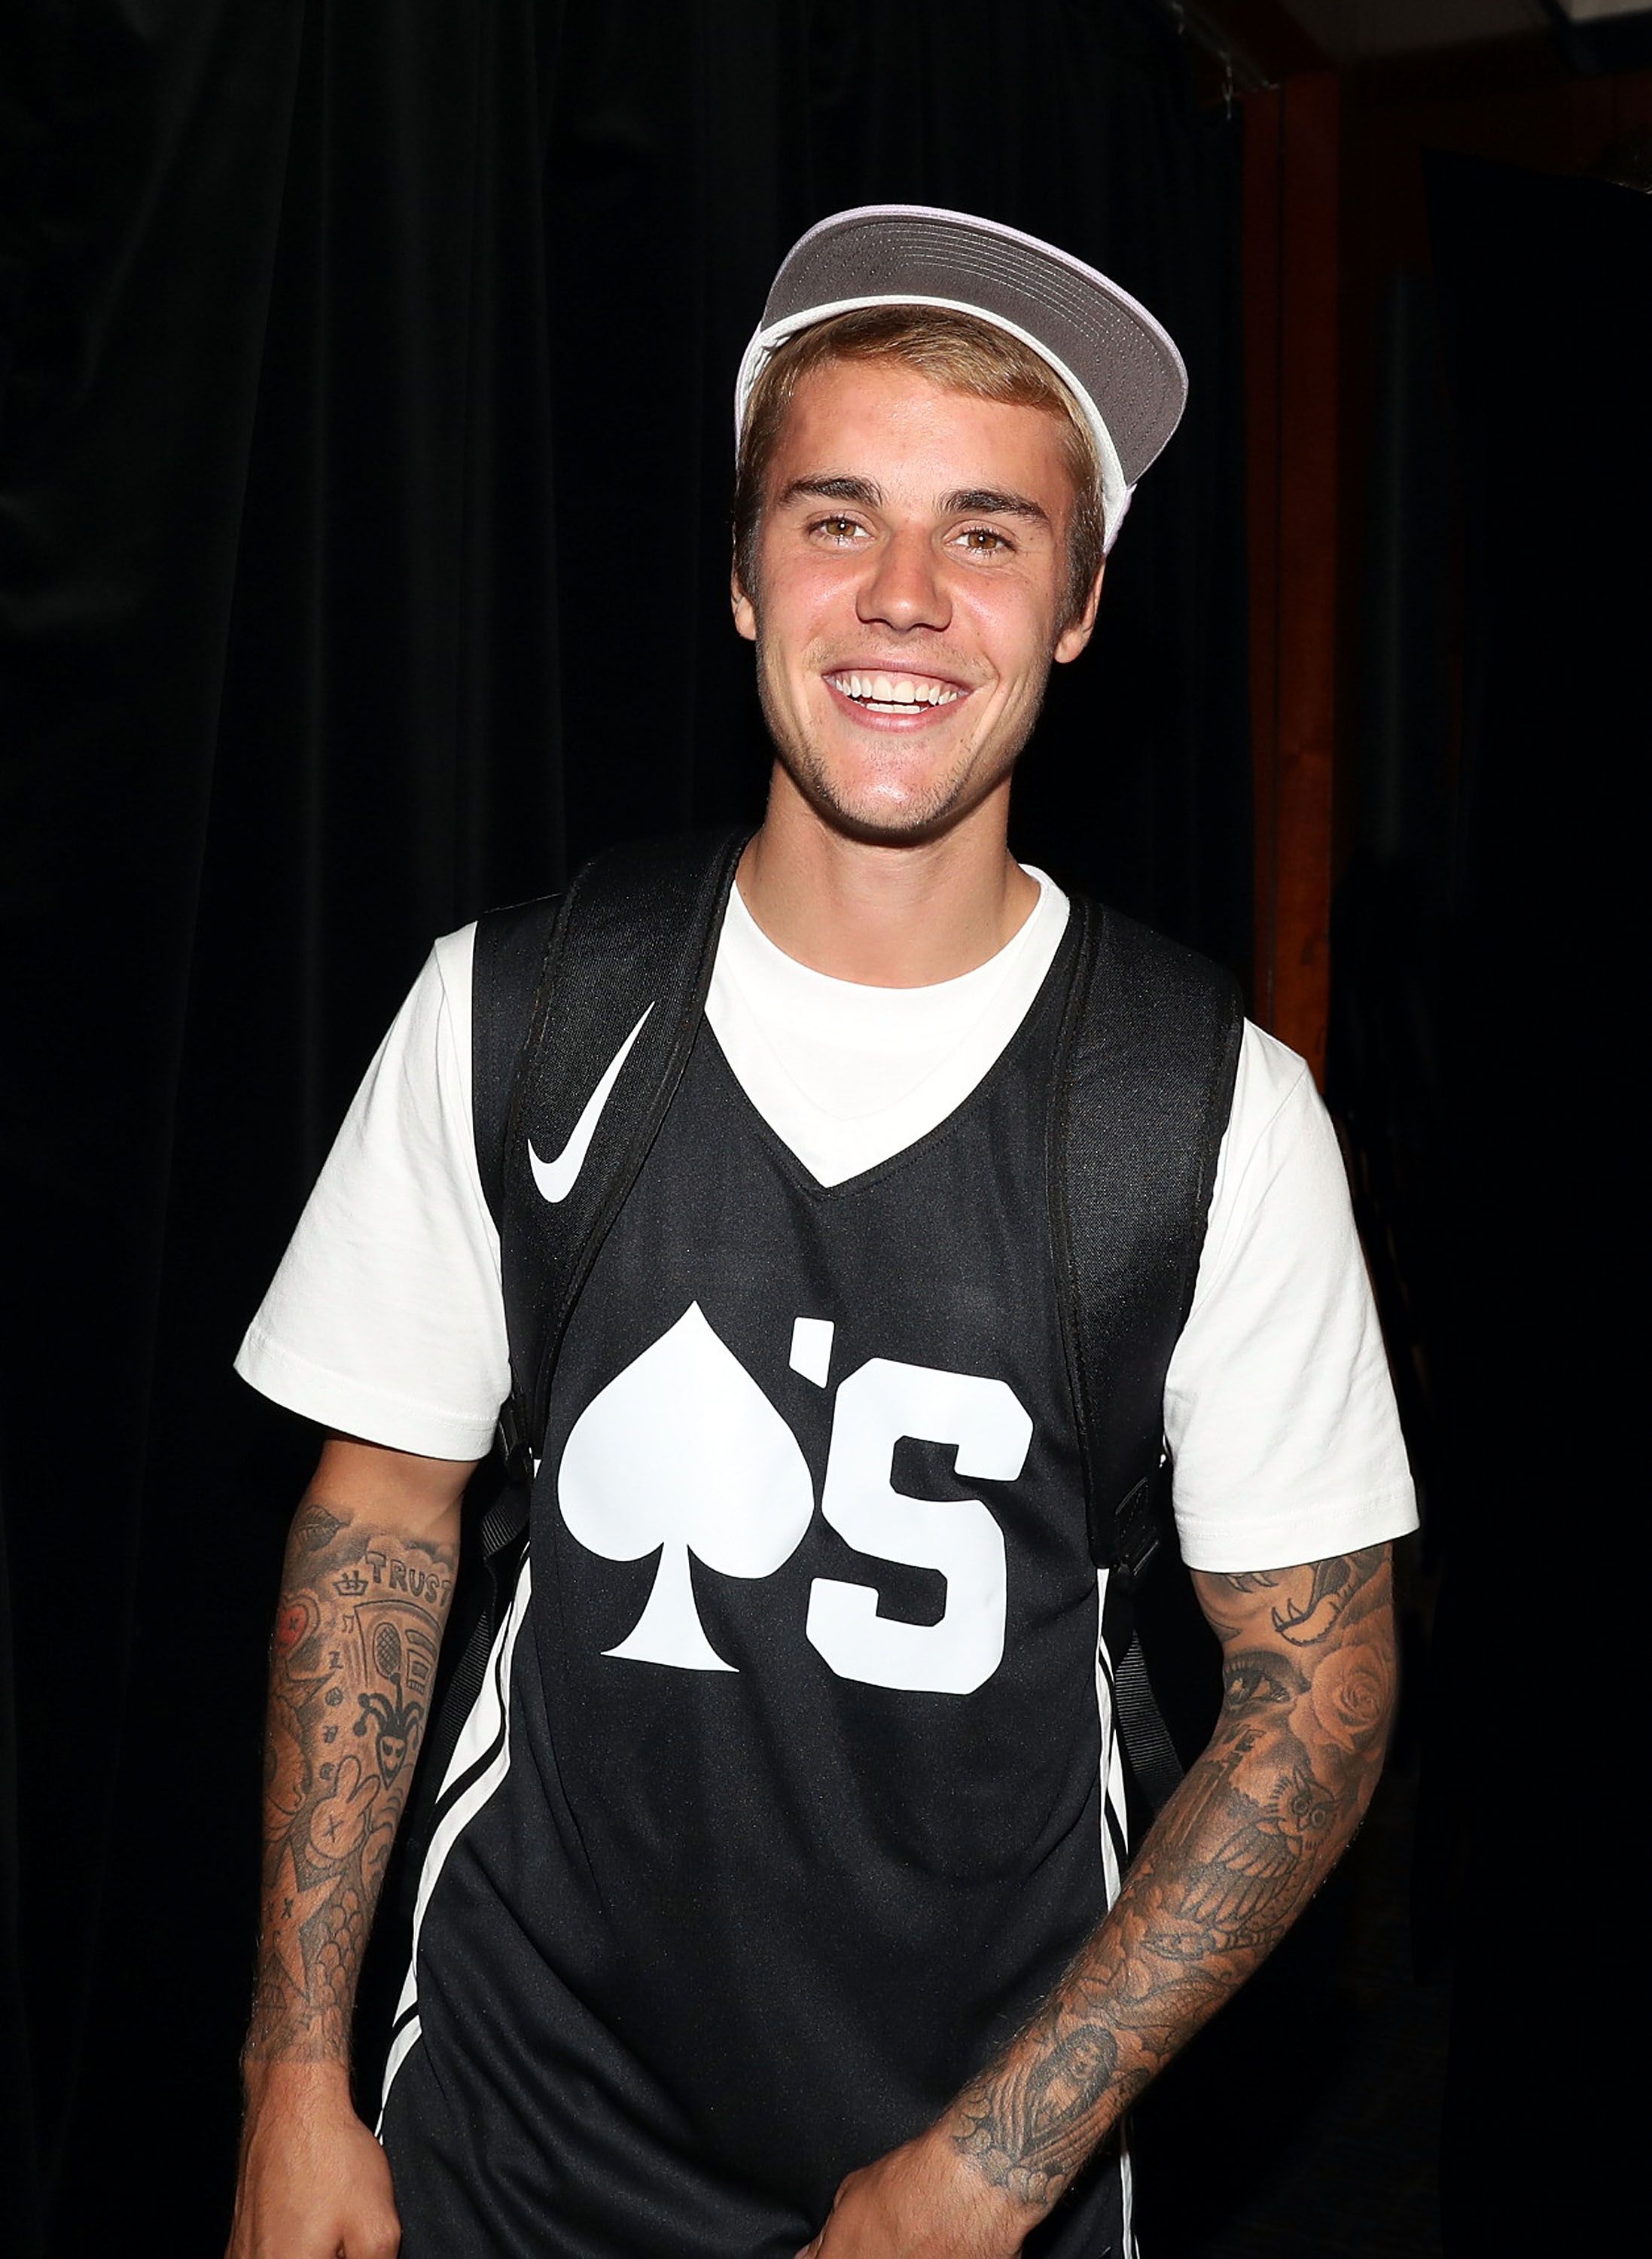 Justin Bieber attends 2017 Aces Charity Celebrity Basketball Game at Madison Square Garden | Getty Images